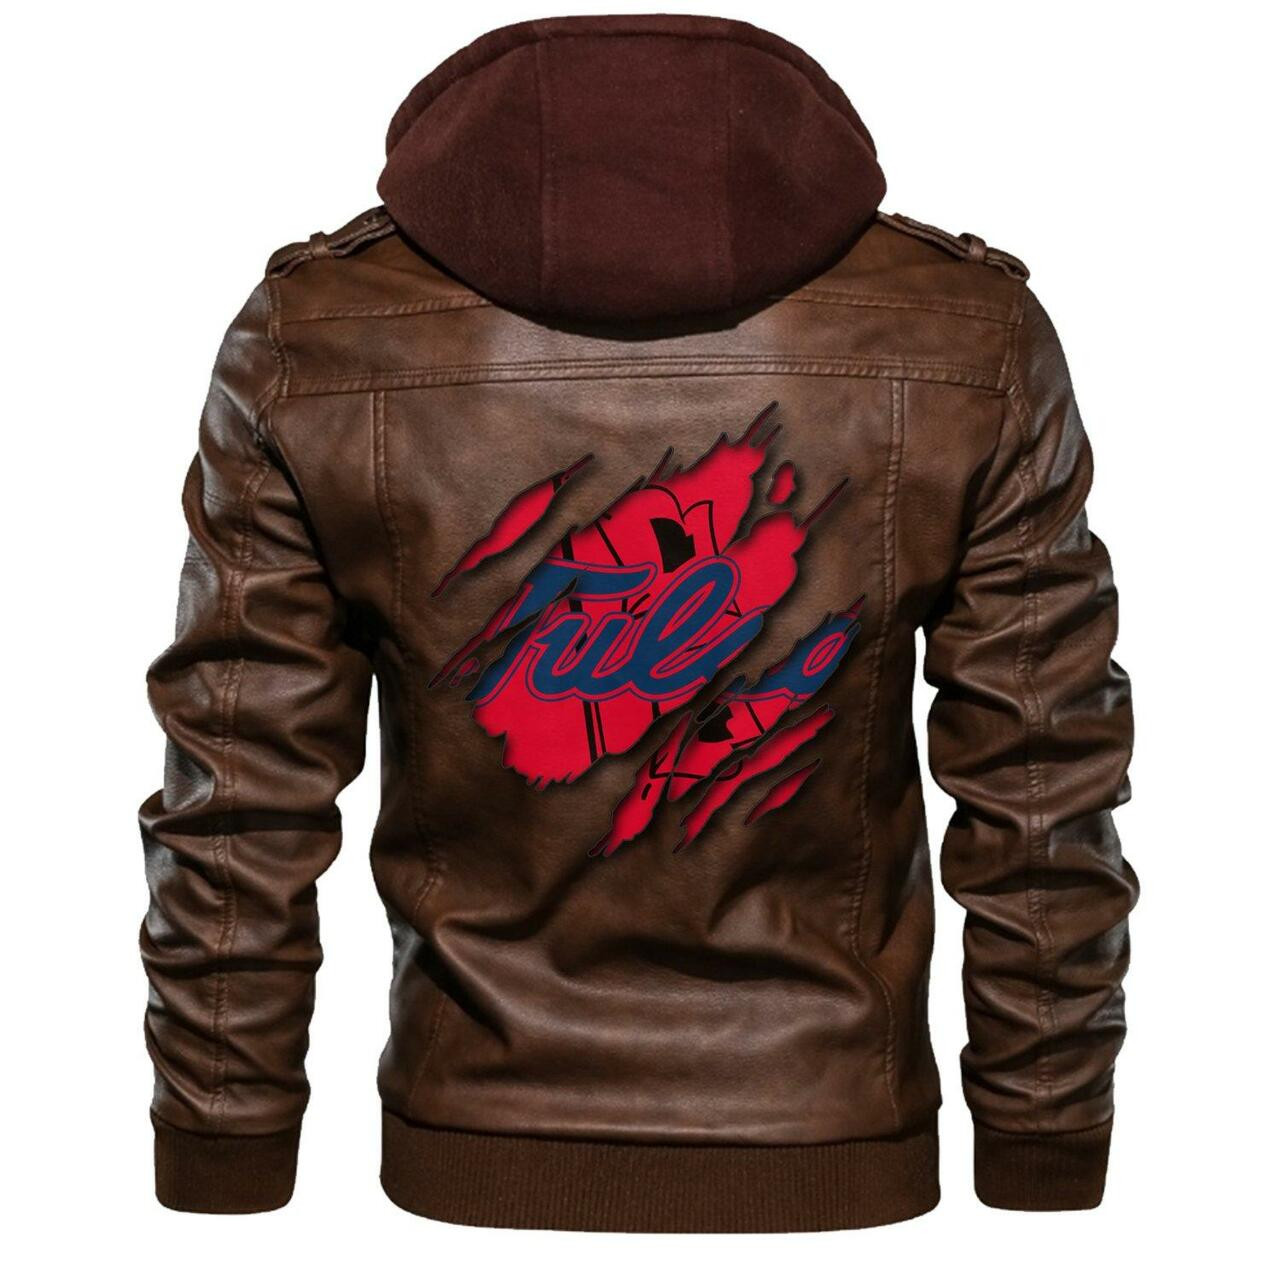 Are you looking for a great leather jacket? 202